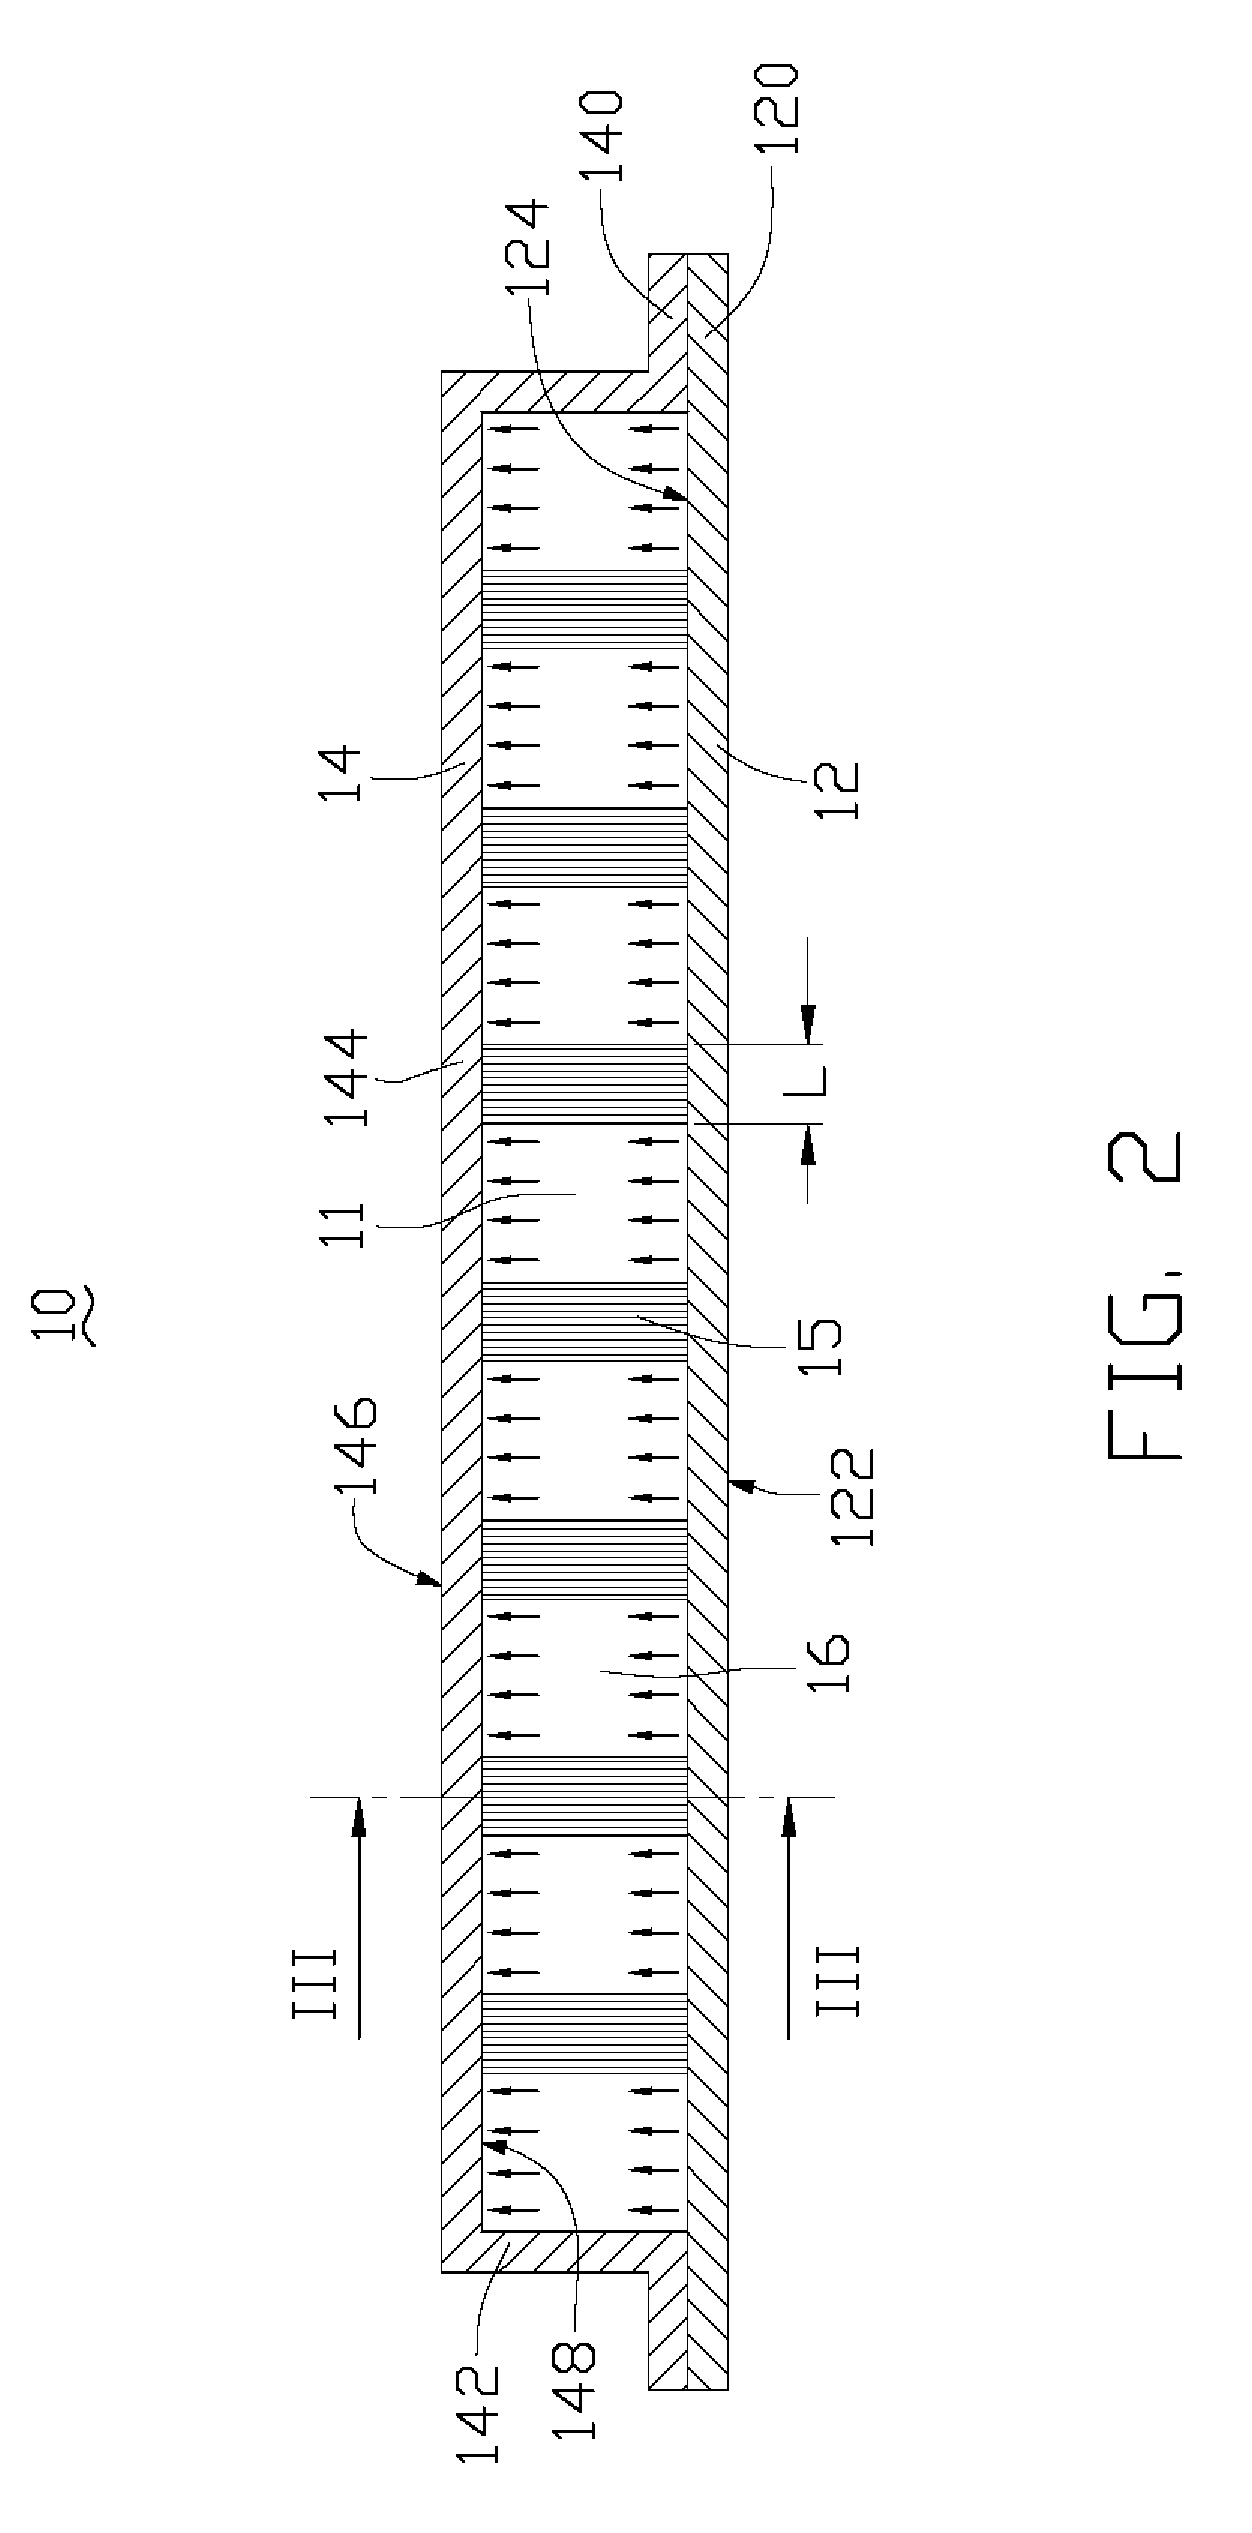 Heat spreader with vapor chamber defined therein